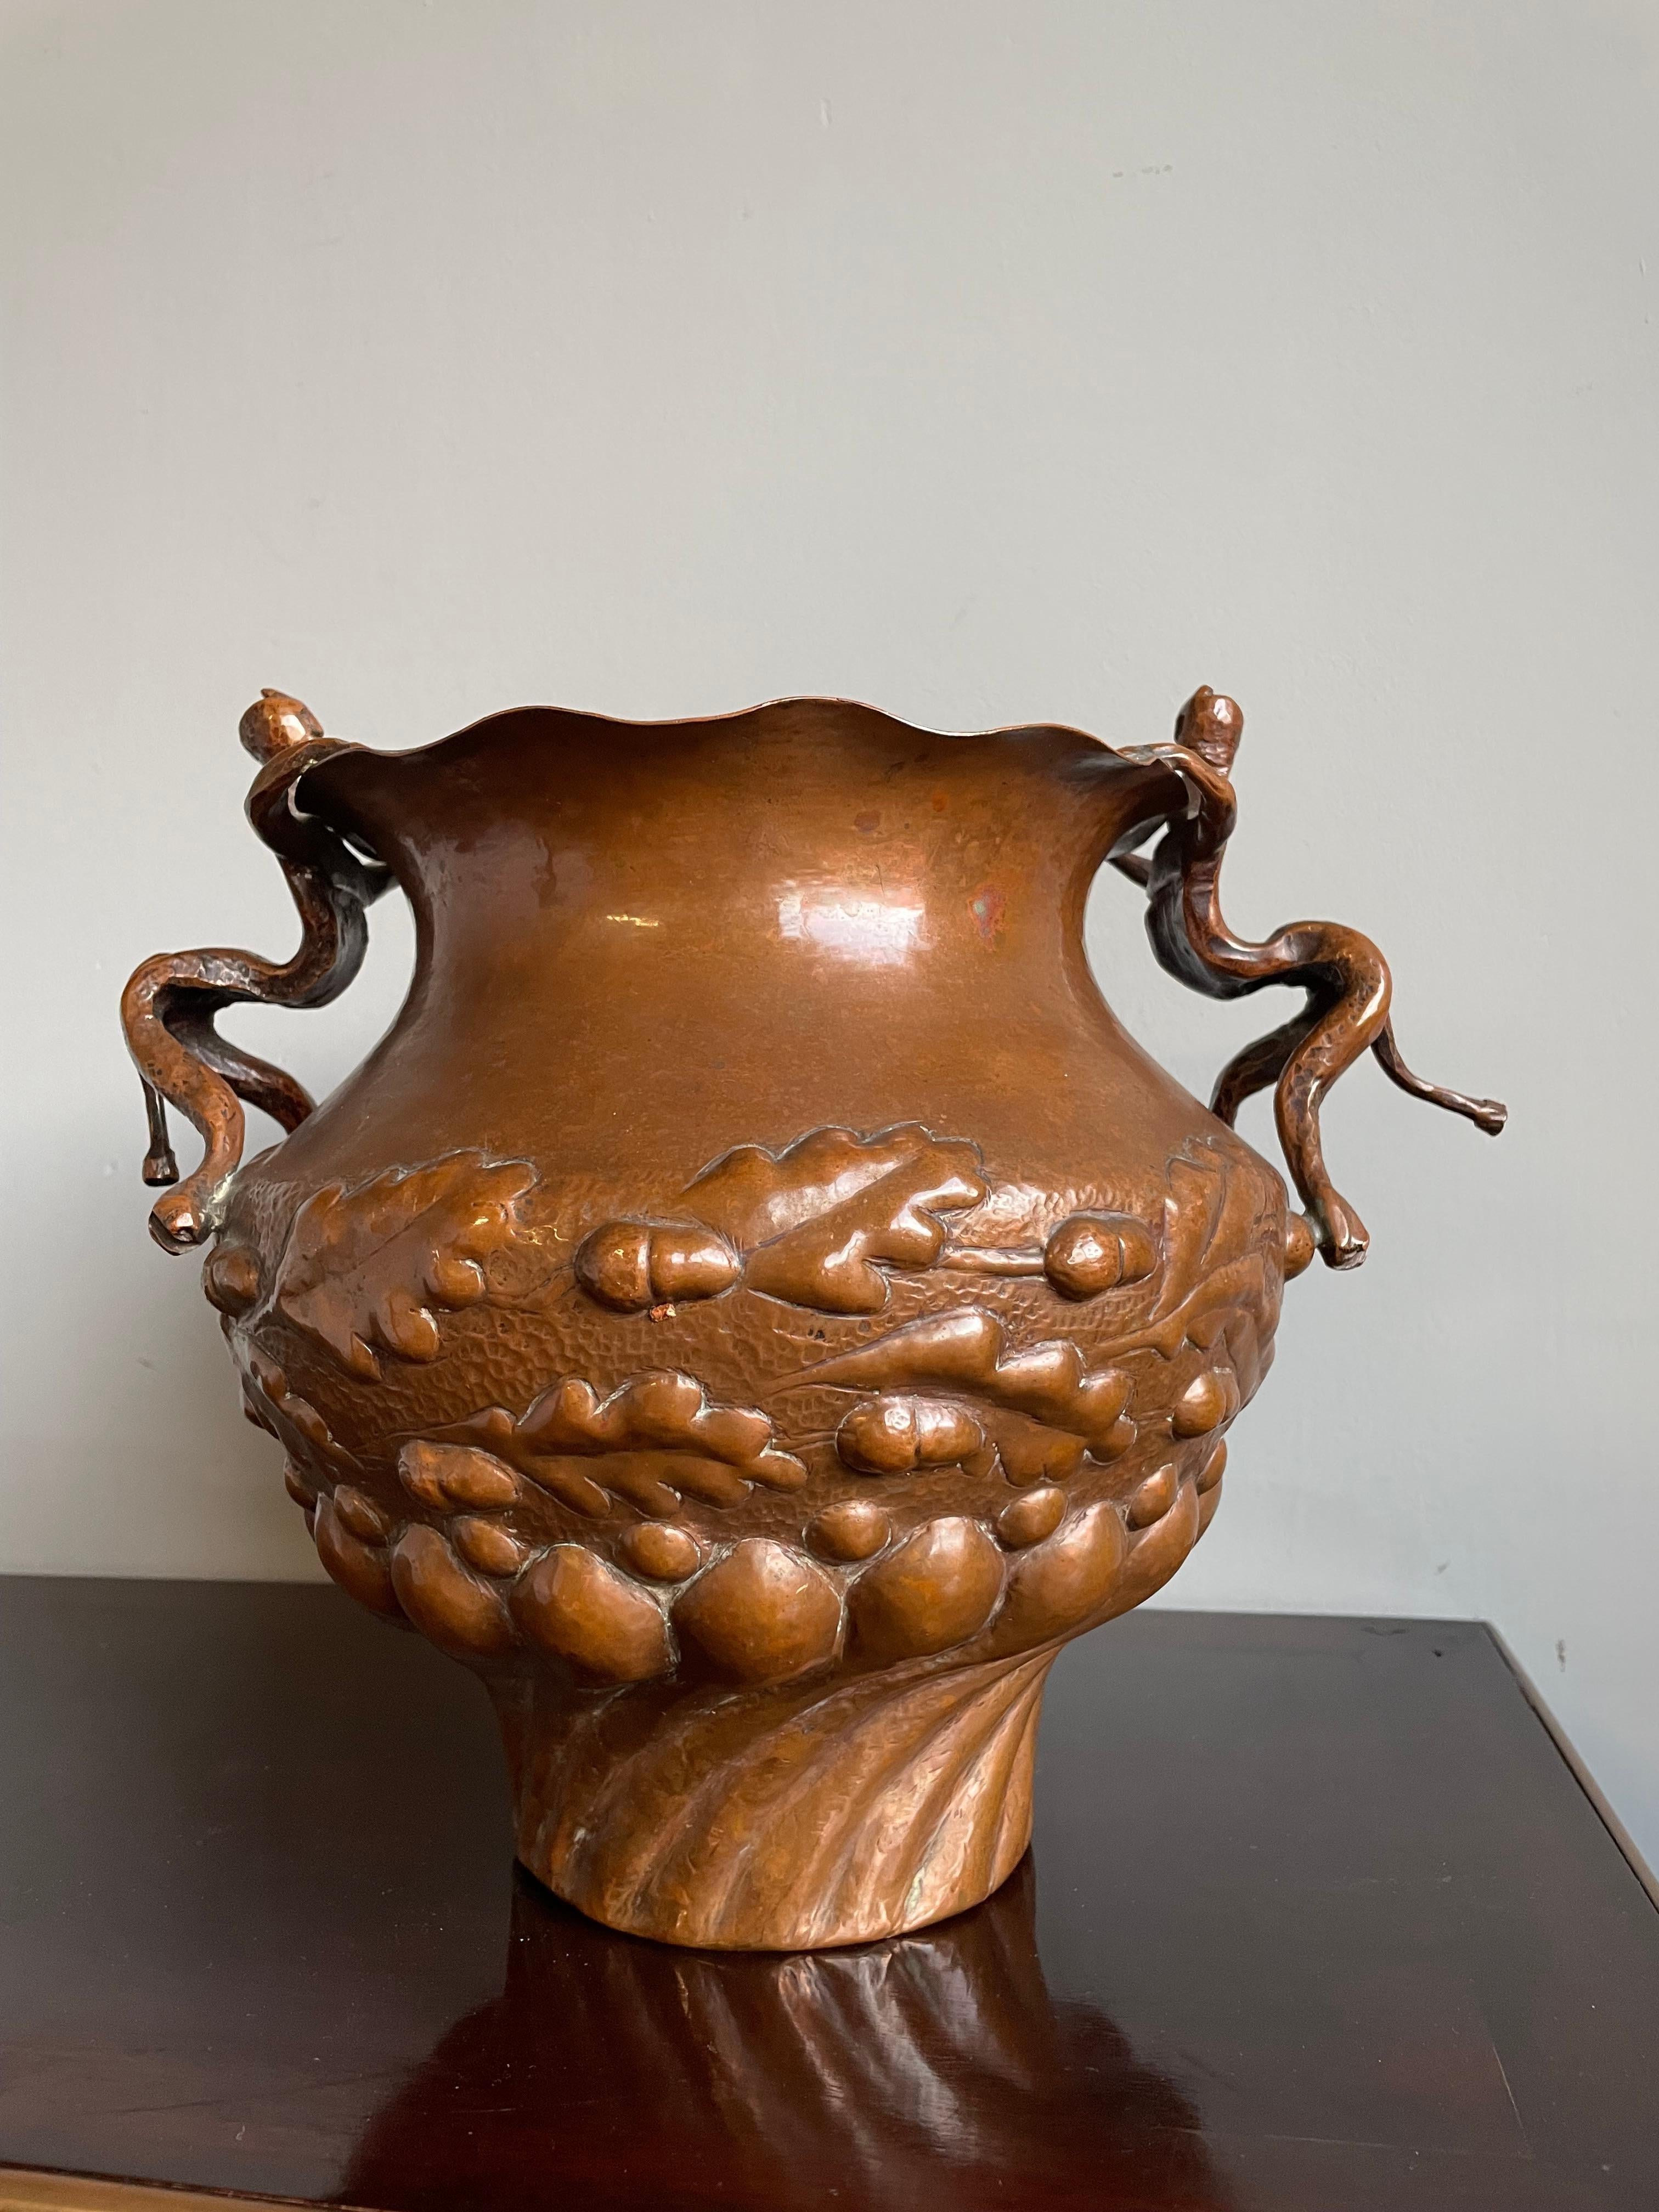 Unique Mid 1800s Embossed Copper Planter / Vase with Satyr Sculptures as Handles In Excellent Condition For Sale In Lisse, NL